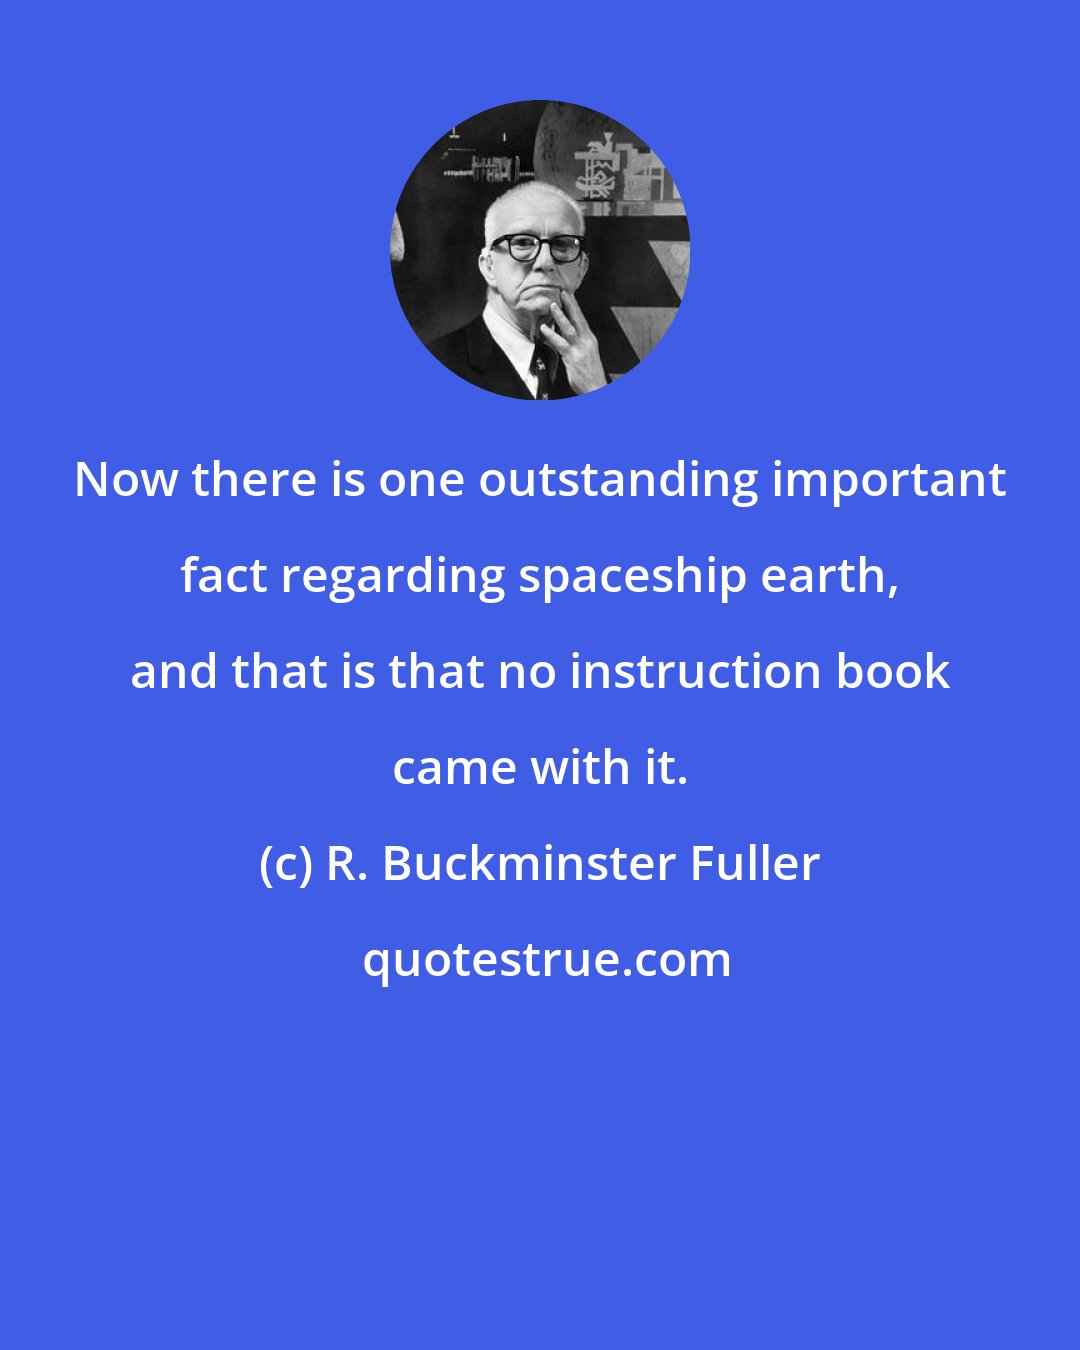 R. Buckminster Fuller: Now there is one outstanding important fact regarding spaceship earth, and that is that no instruction book came with it.